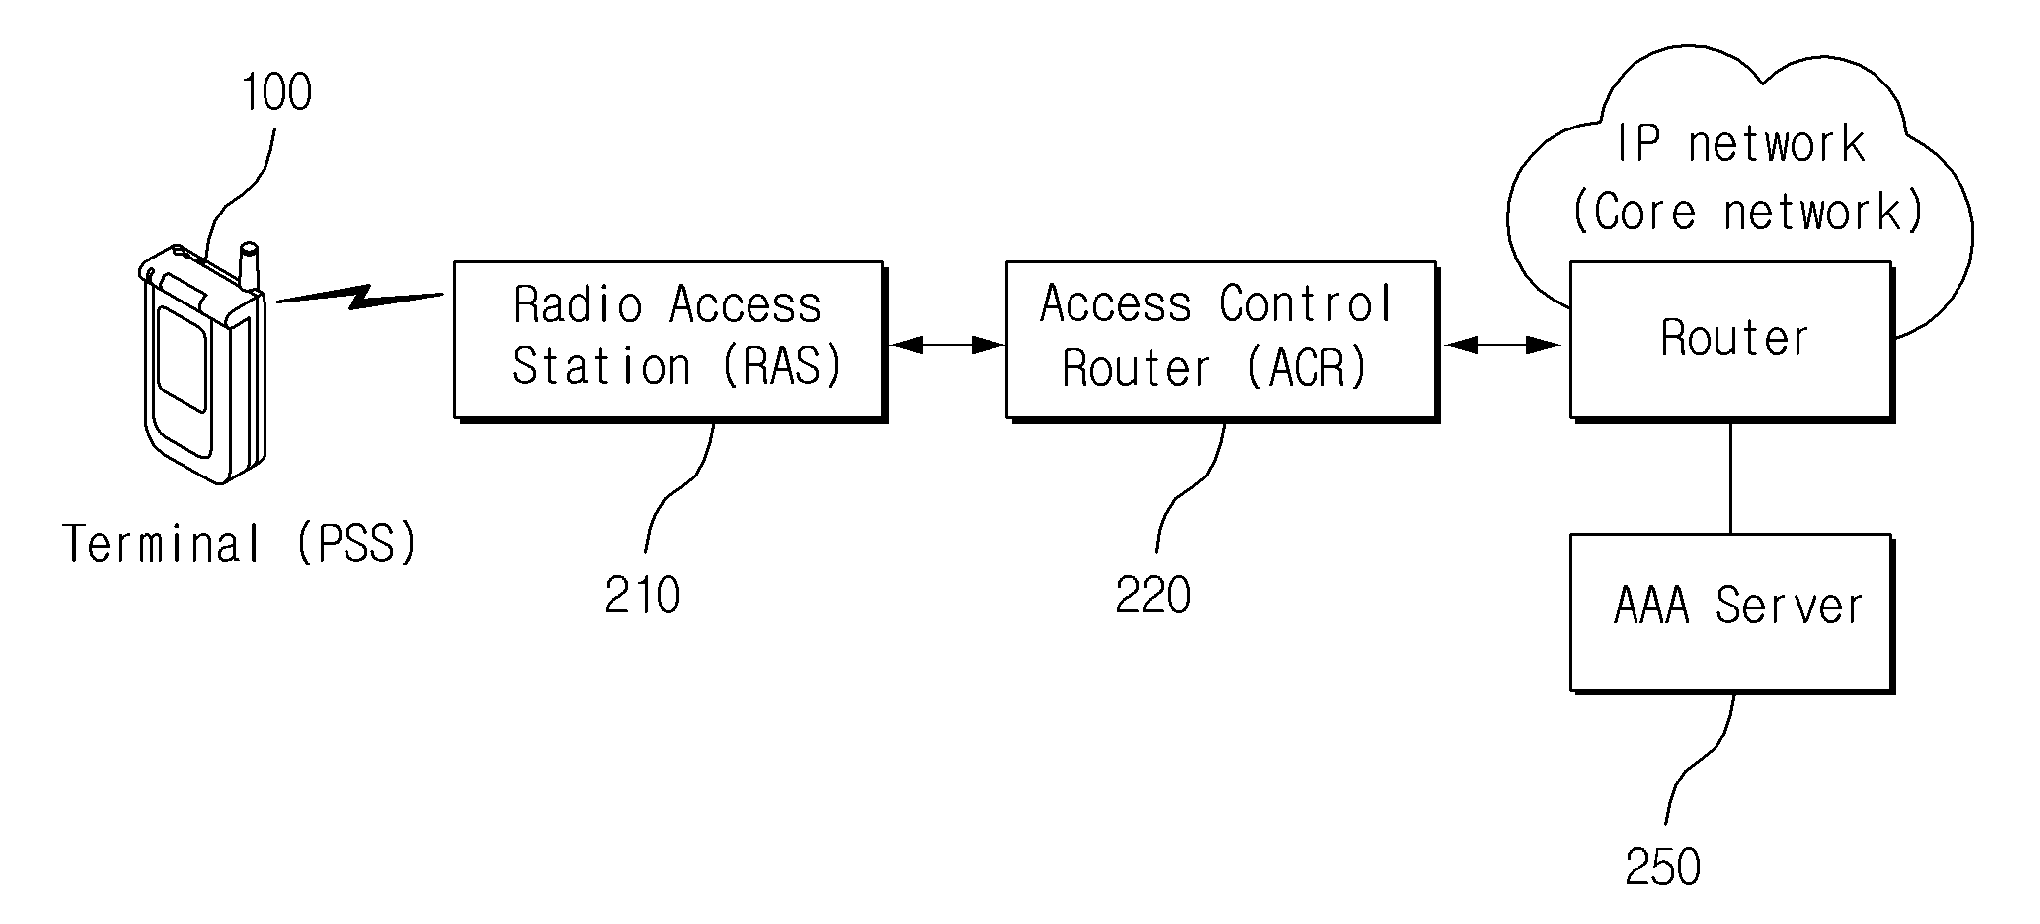 Apparatus and Method for Processing Eap-Aka Authentication in the Non-Usim Terminal